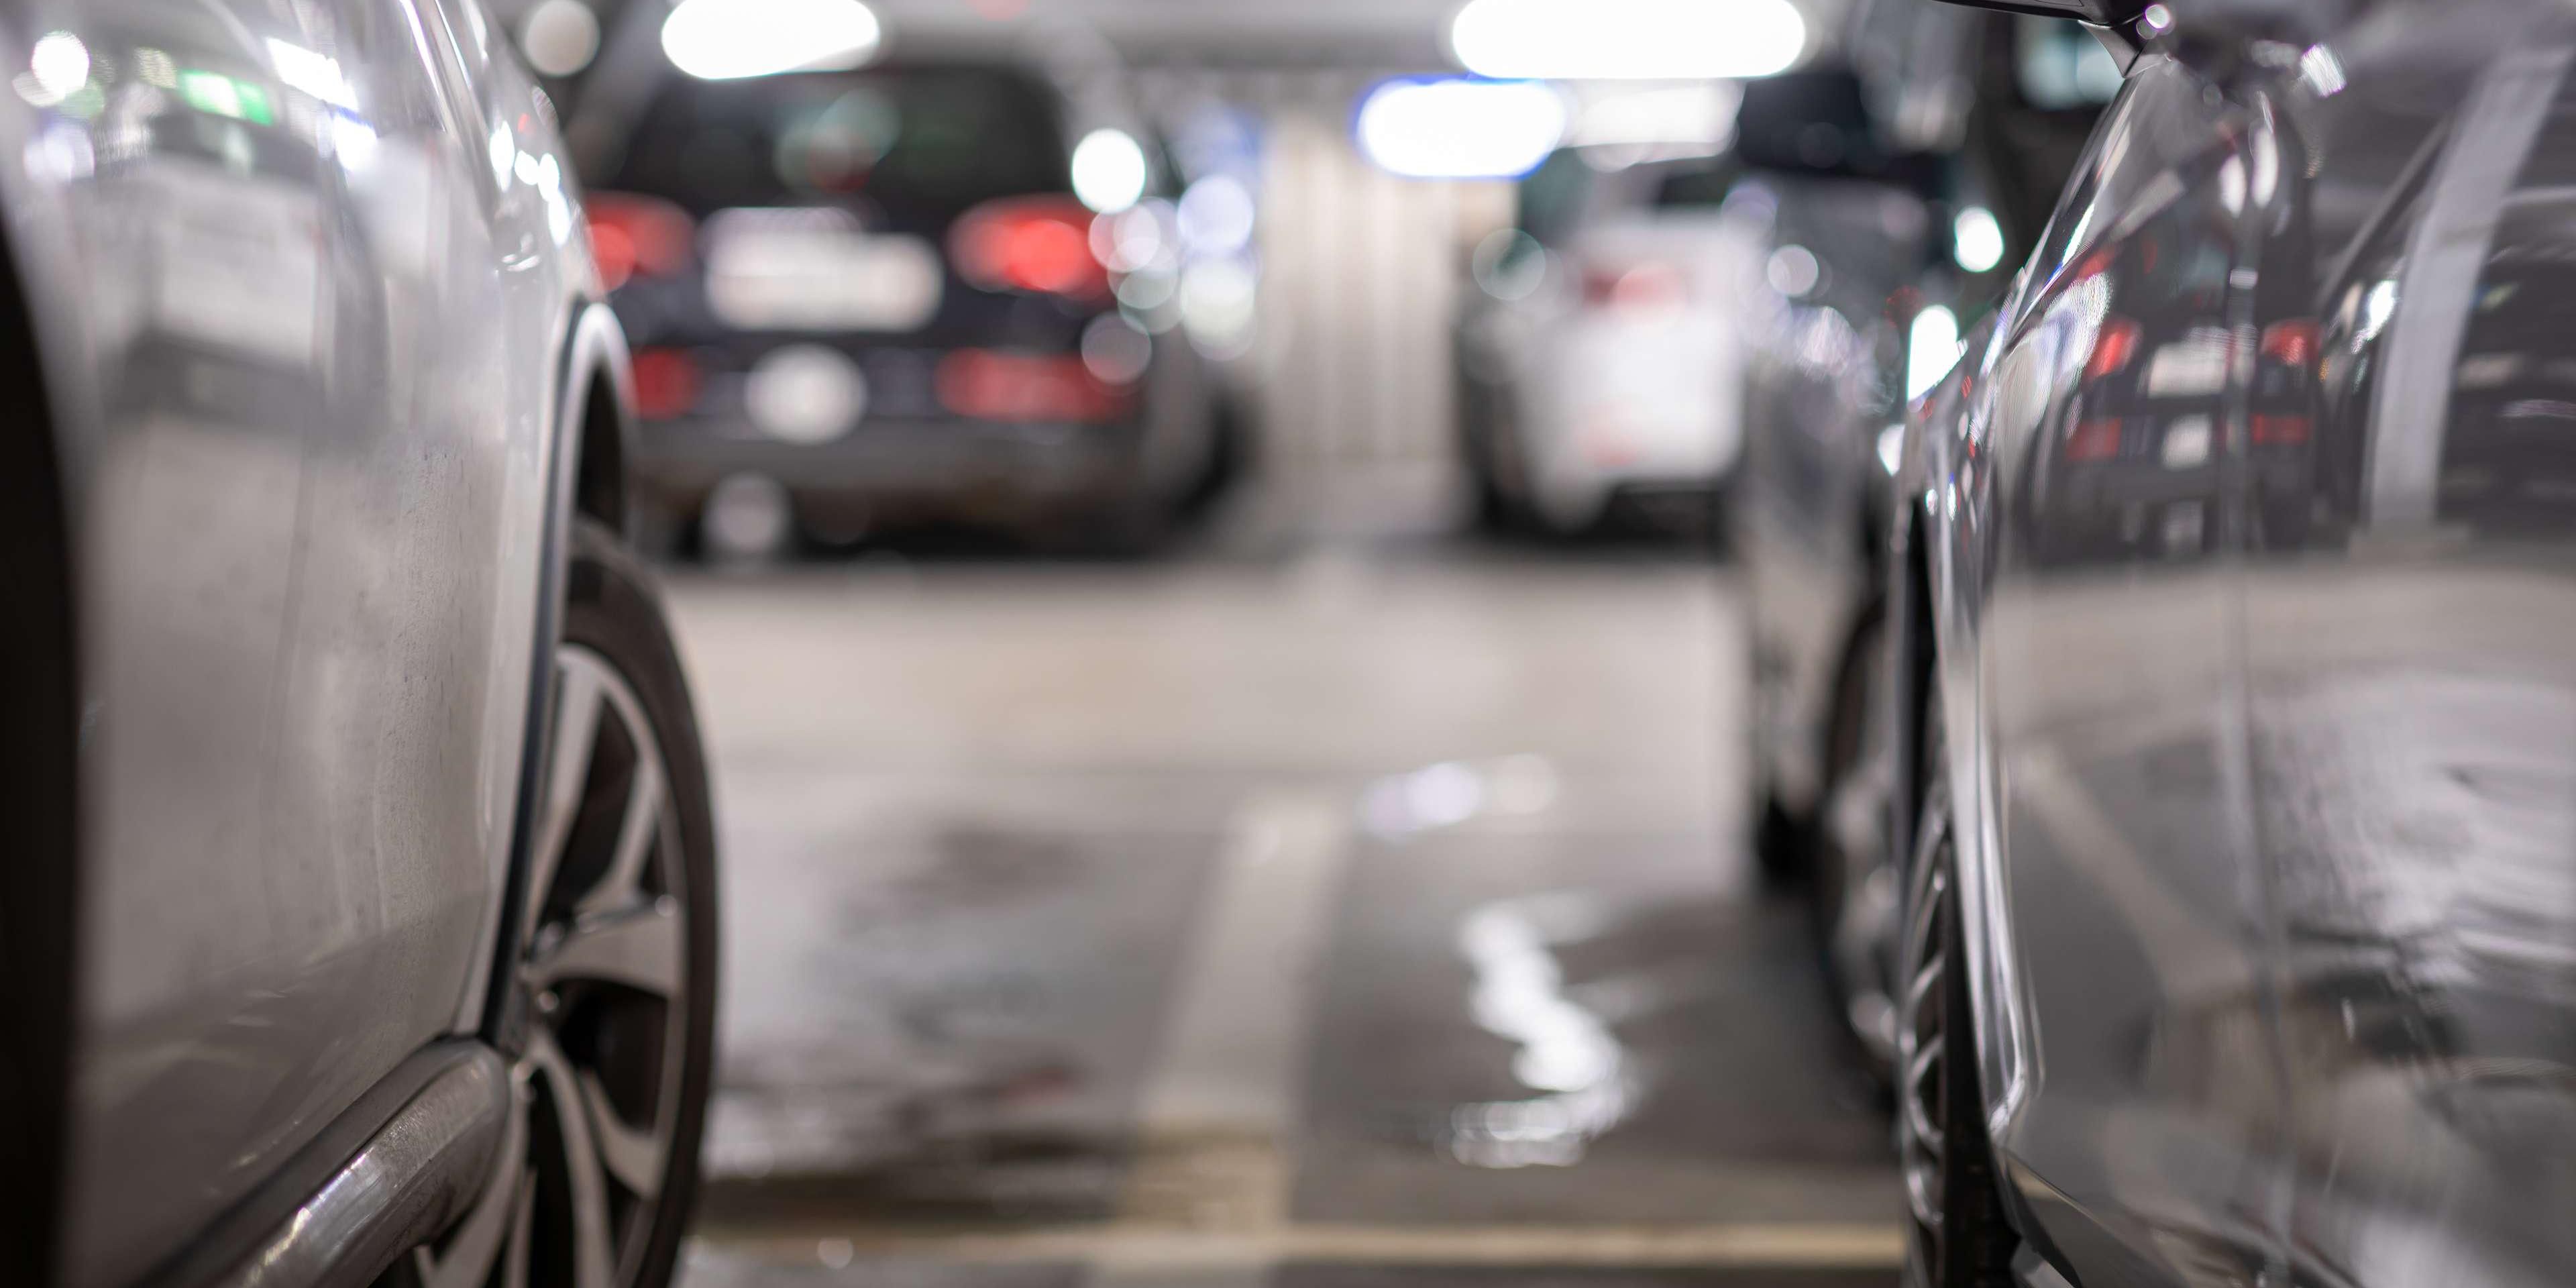 Skip the hassle of paying for parking fees elsewhere! We offer secure and complimentary underground parking.